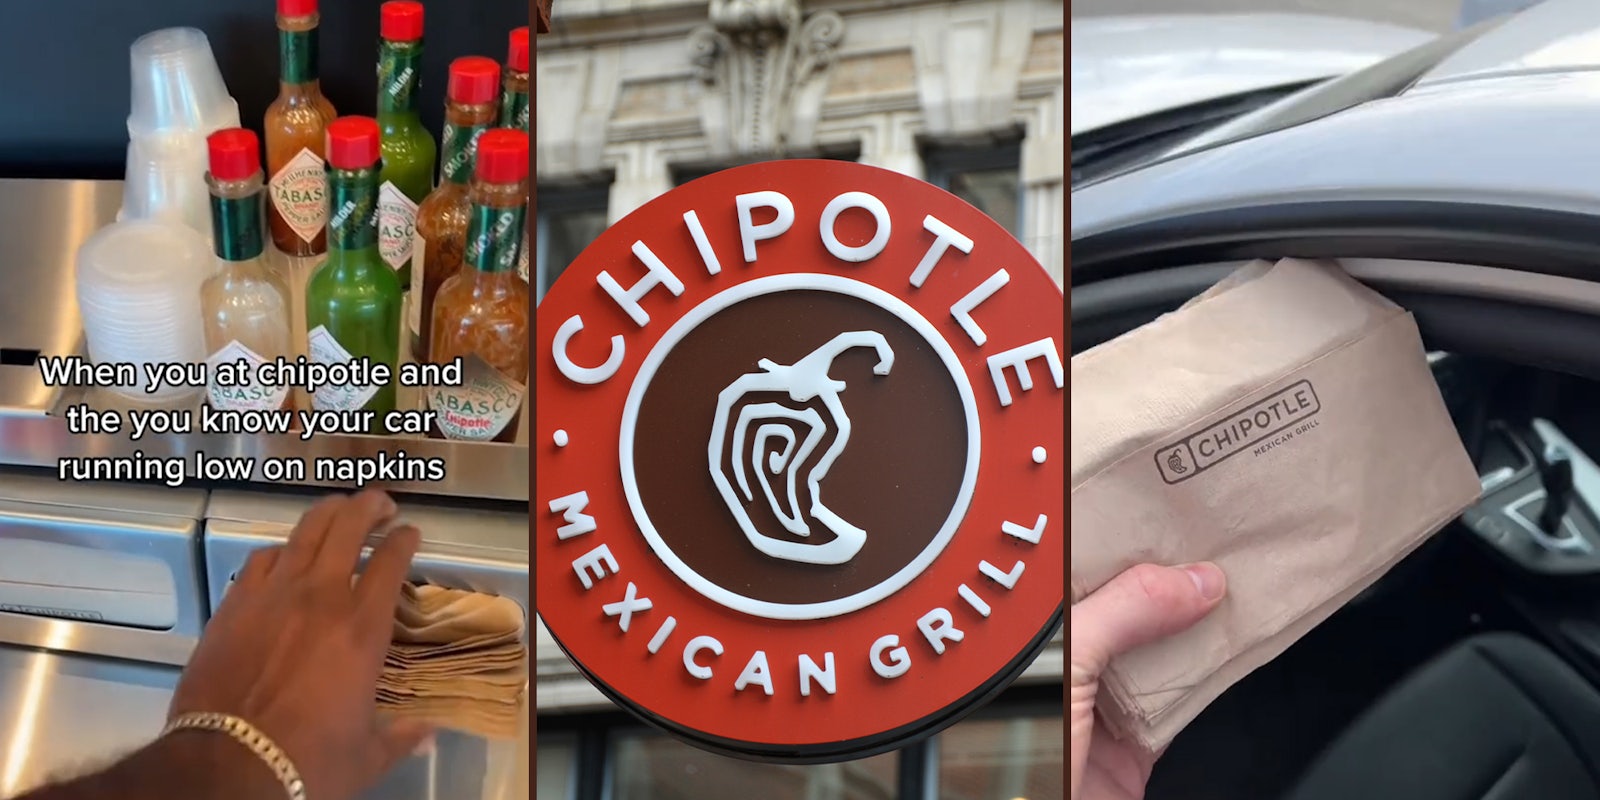 Chipotle announces it’s selling napkin holders to customers.